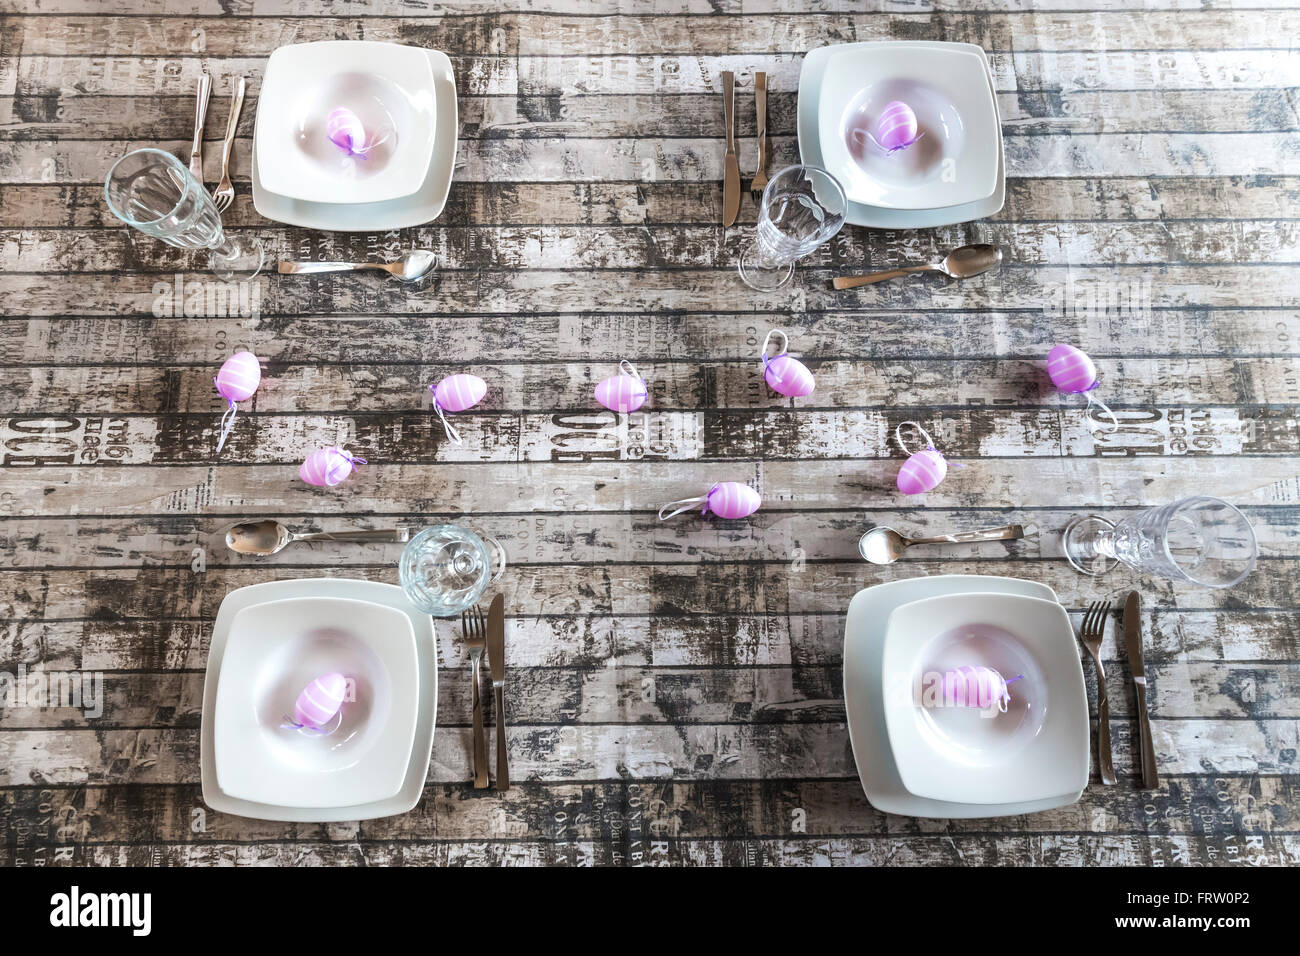 Four place settings on laid table with Easter decoration Stock Photo